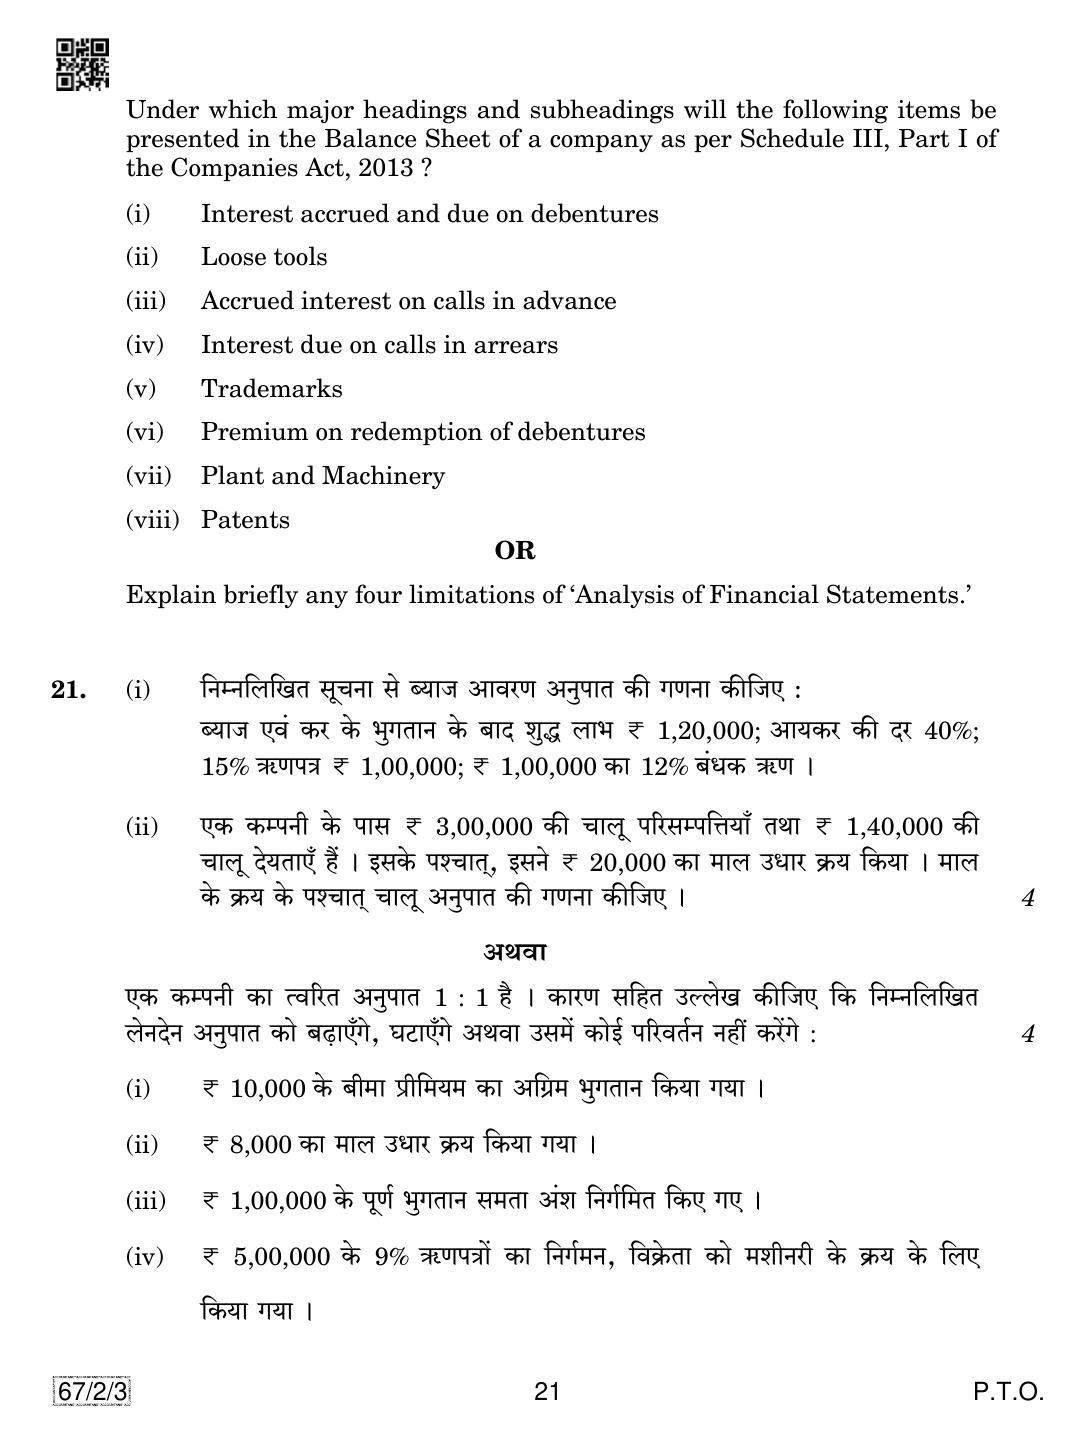 CBSE Class 12 67-2-3 Accountancy 2019 Question Paper - Page 21